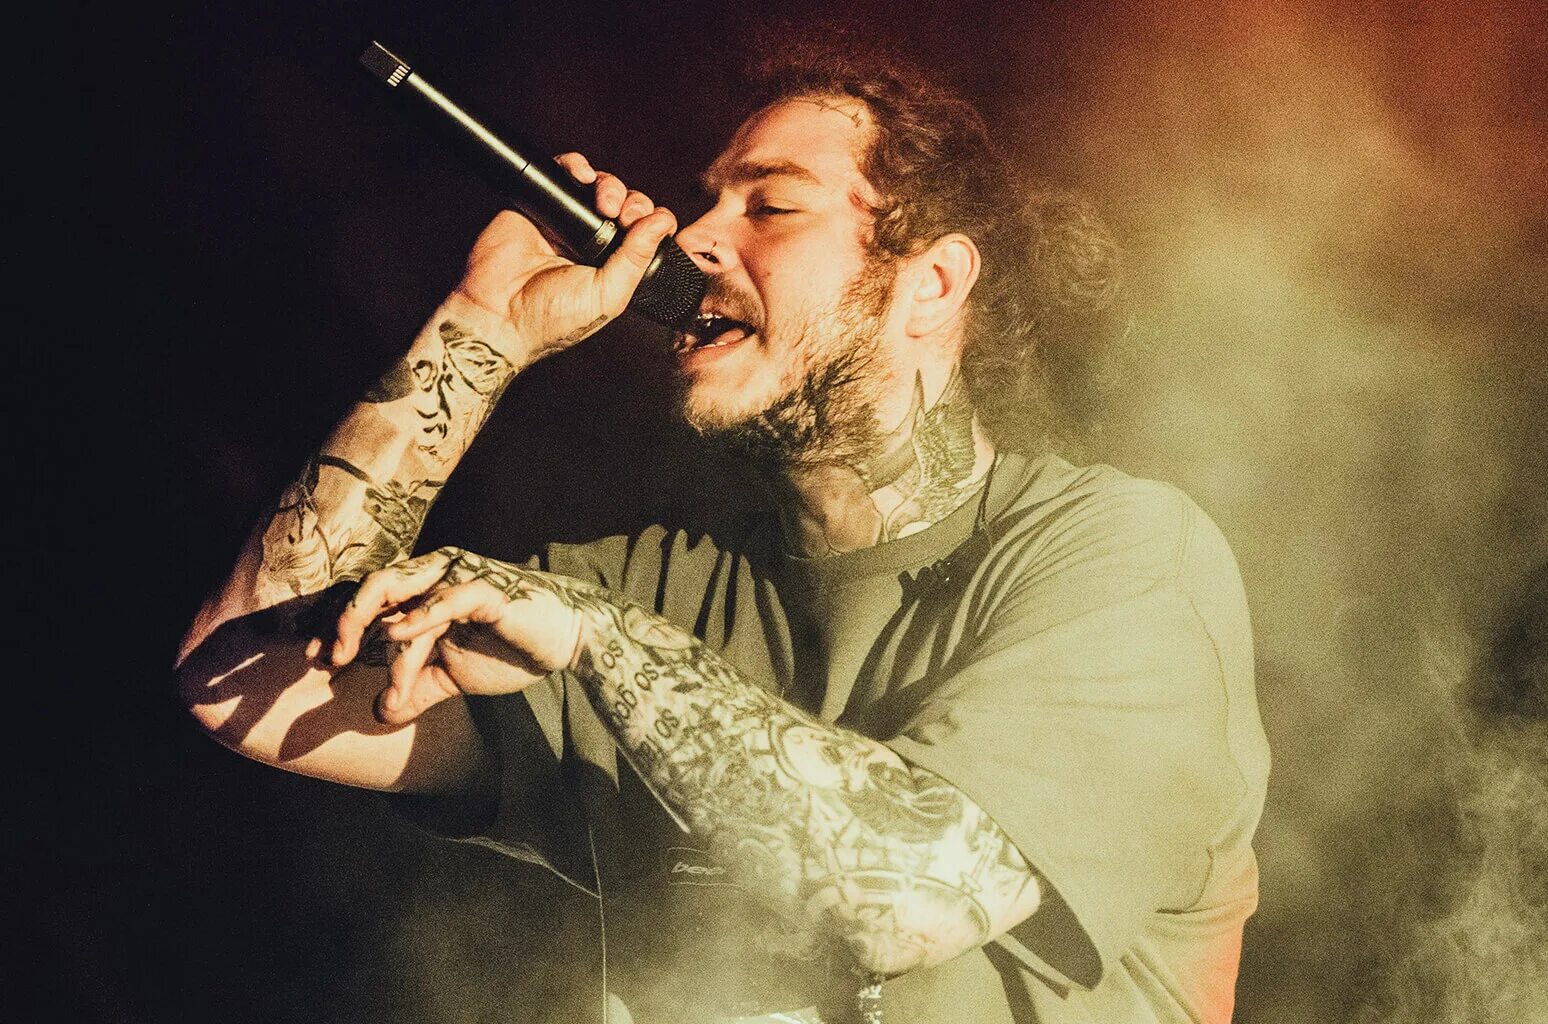 Post Malone Post Malone. Post Malone фото. Post malone now